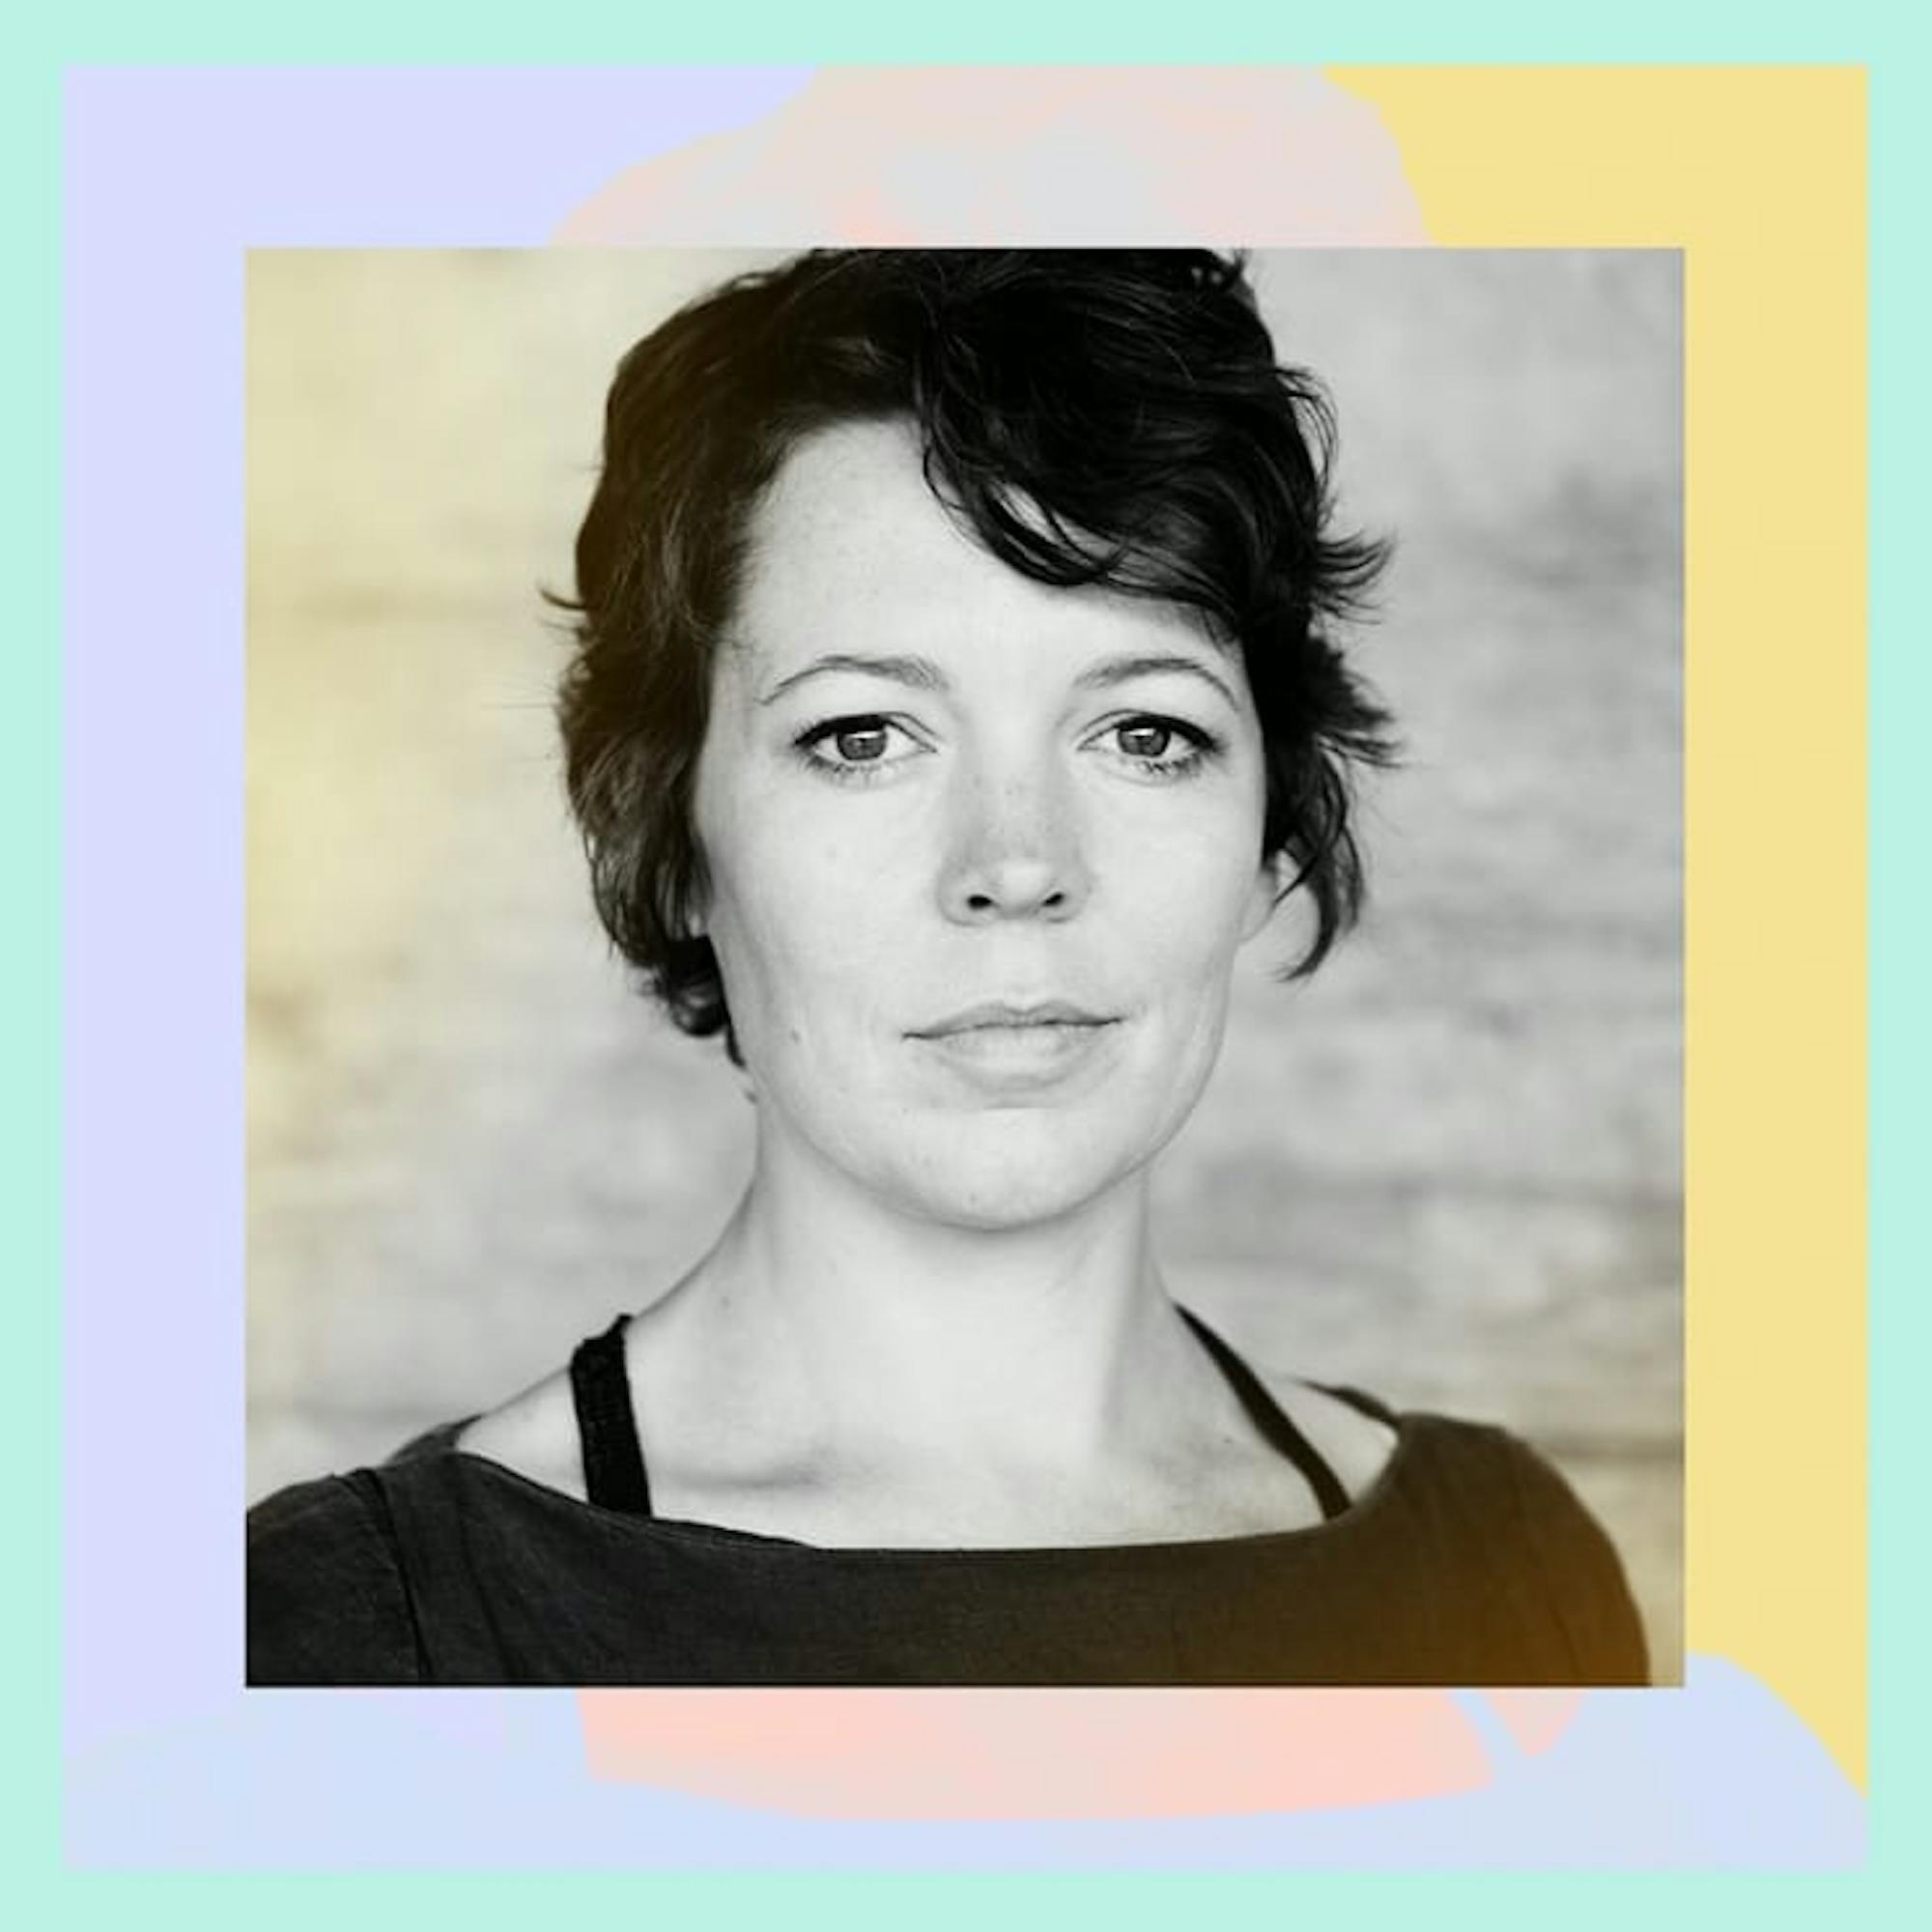 Olivia Colman: Lead actress in a drama series, The Crown